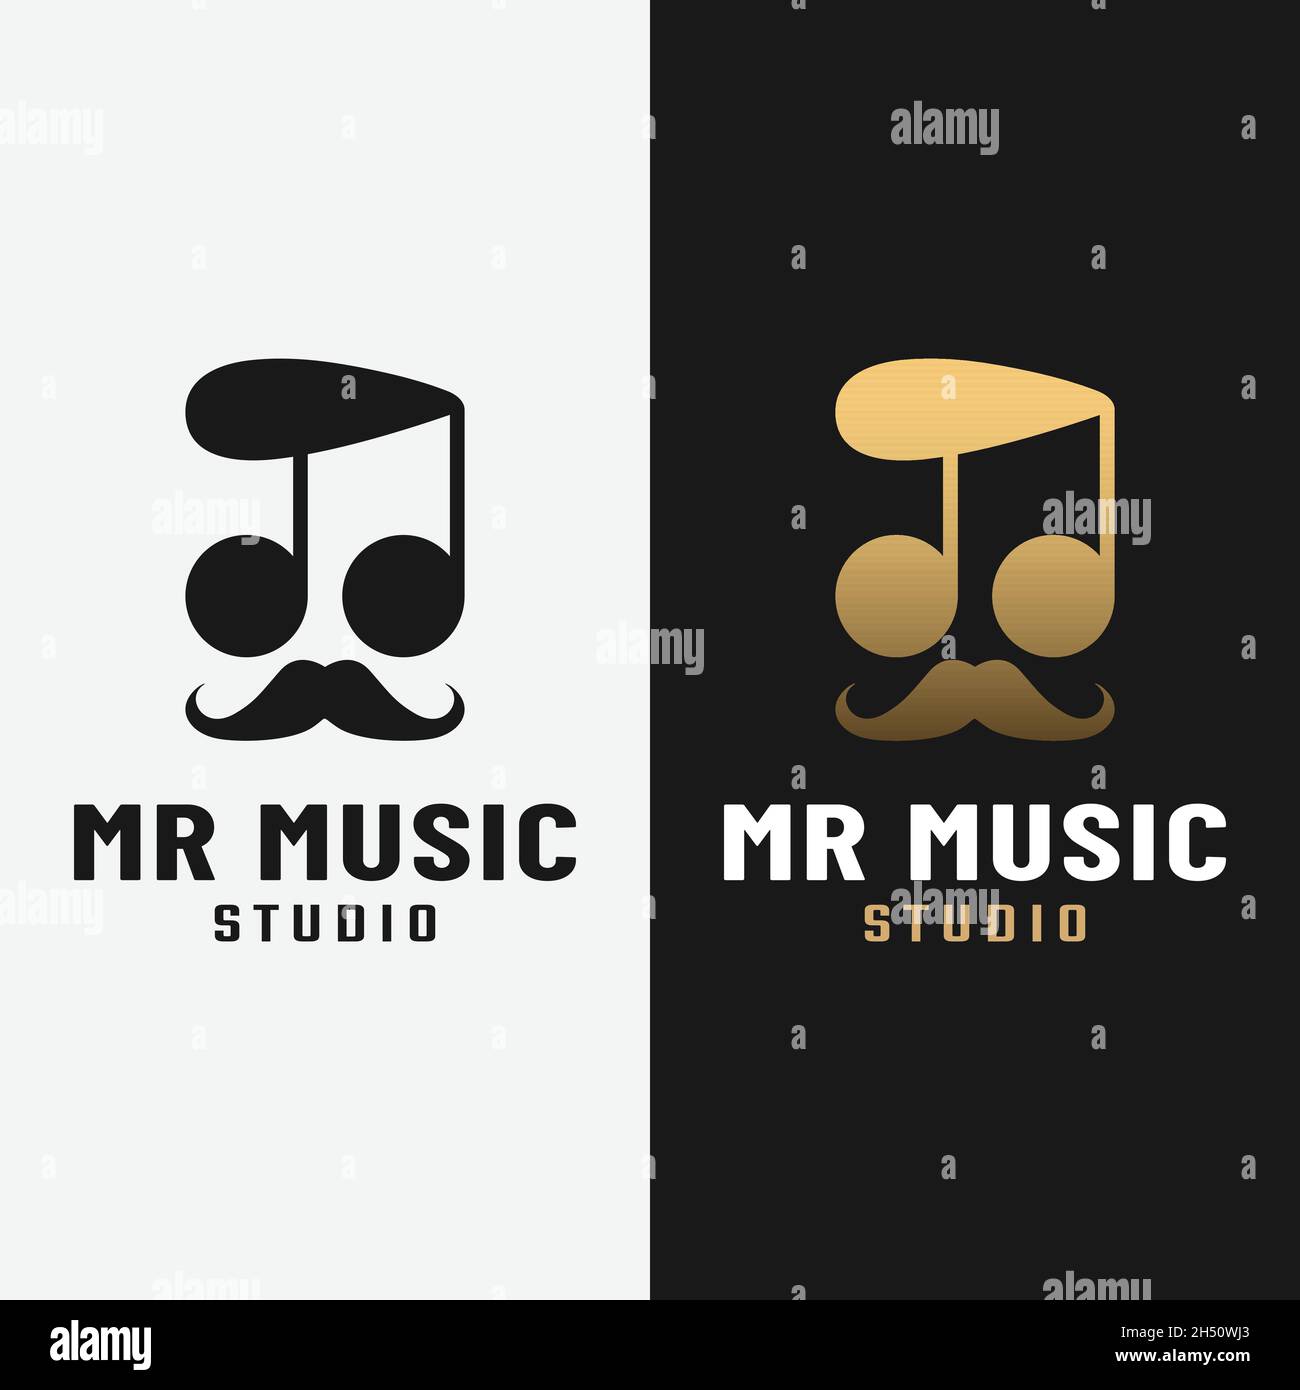 Music Notes and Mustache for Mr Music Logo Design Template. This logo represents musical notes as hair and a man wearing sunglasses. Stock Vector